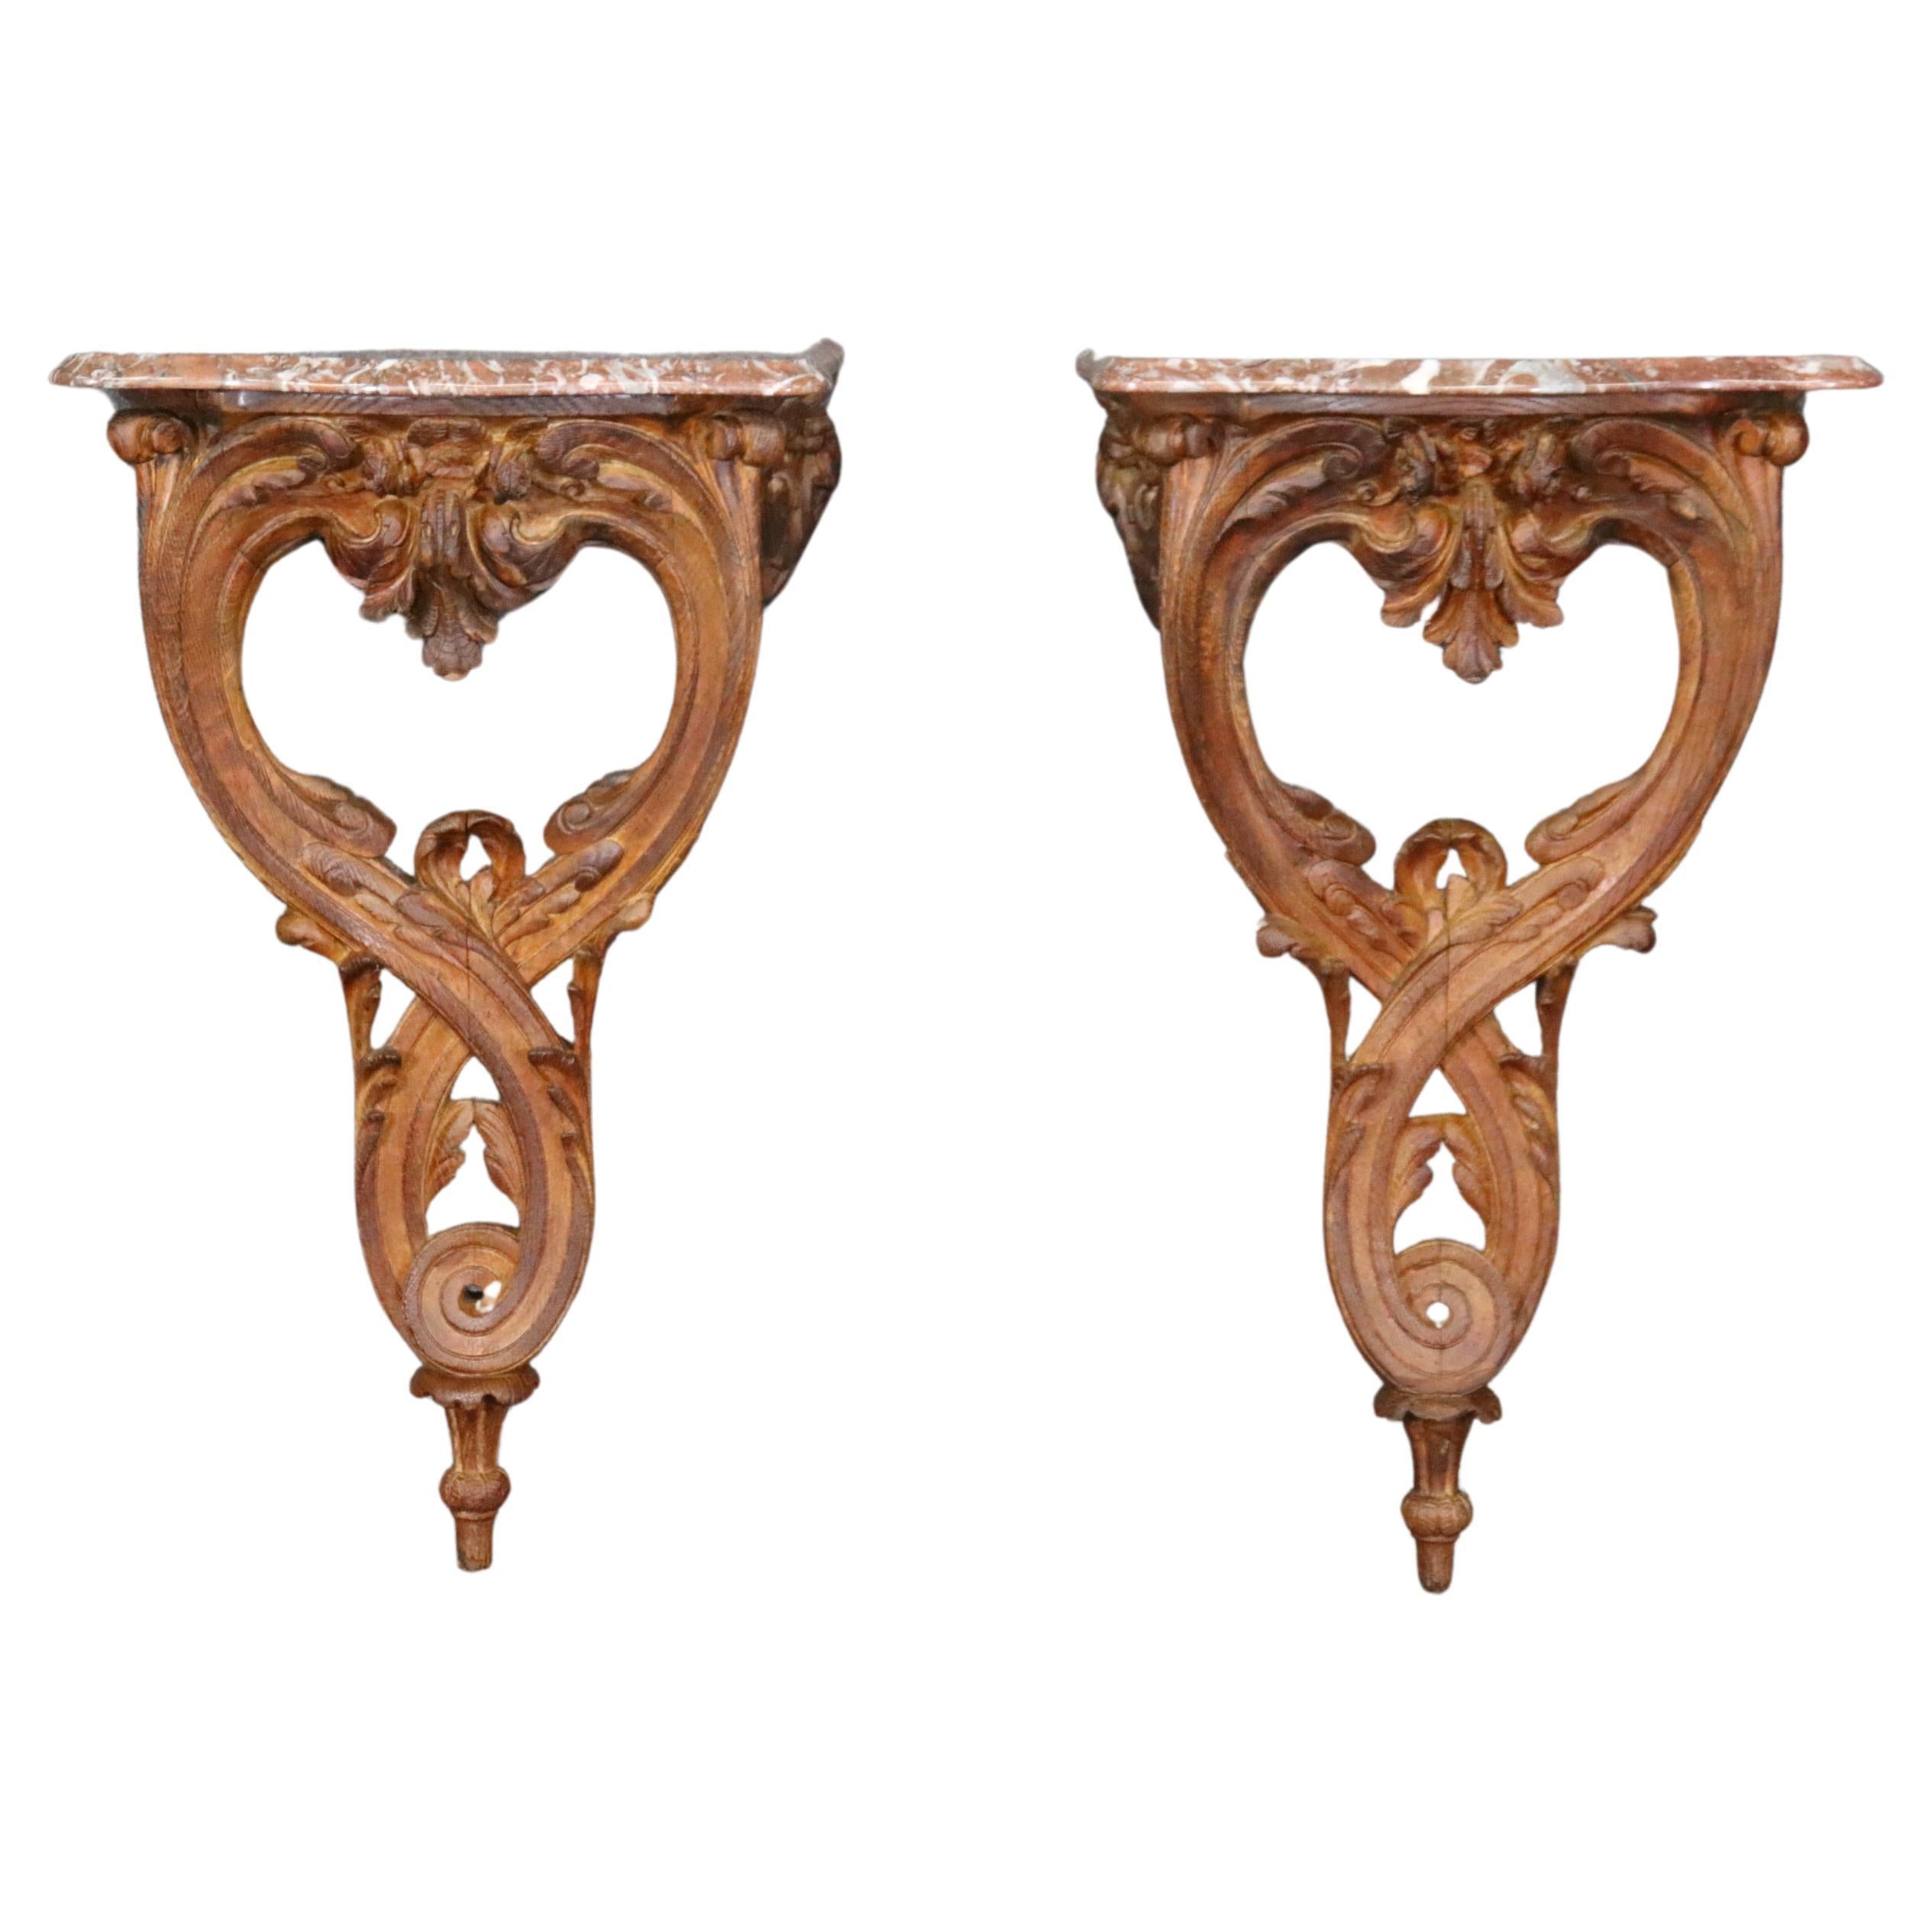 Rare Pair of Maison Jansen Louis XV Style Marble Top Wall Hanging Consoles For Sale